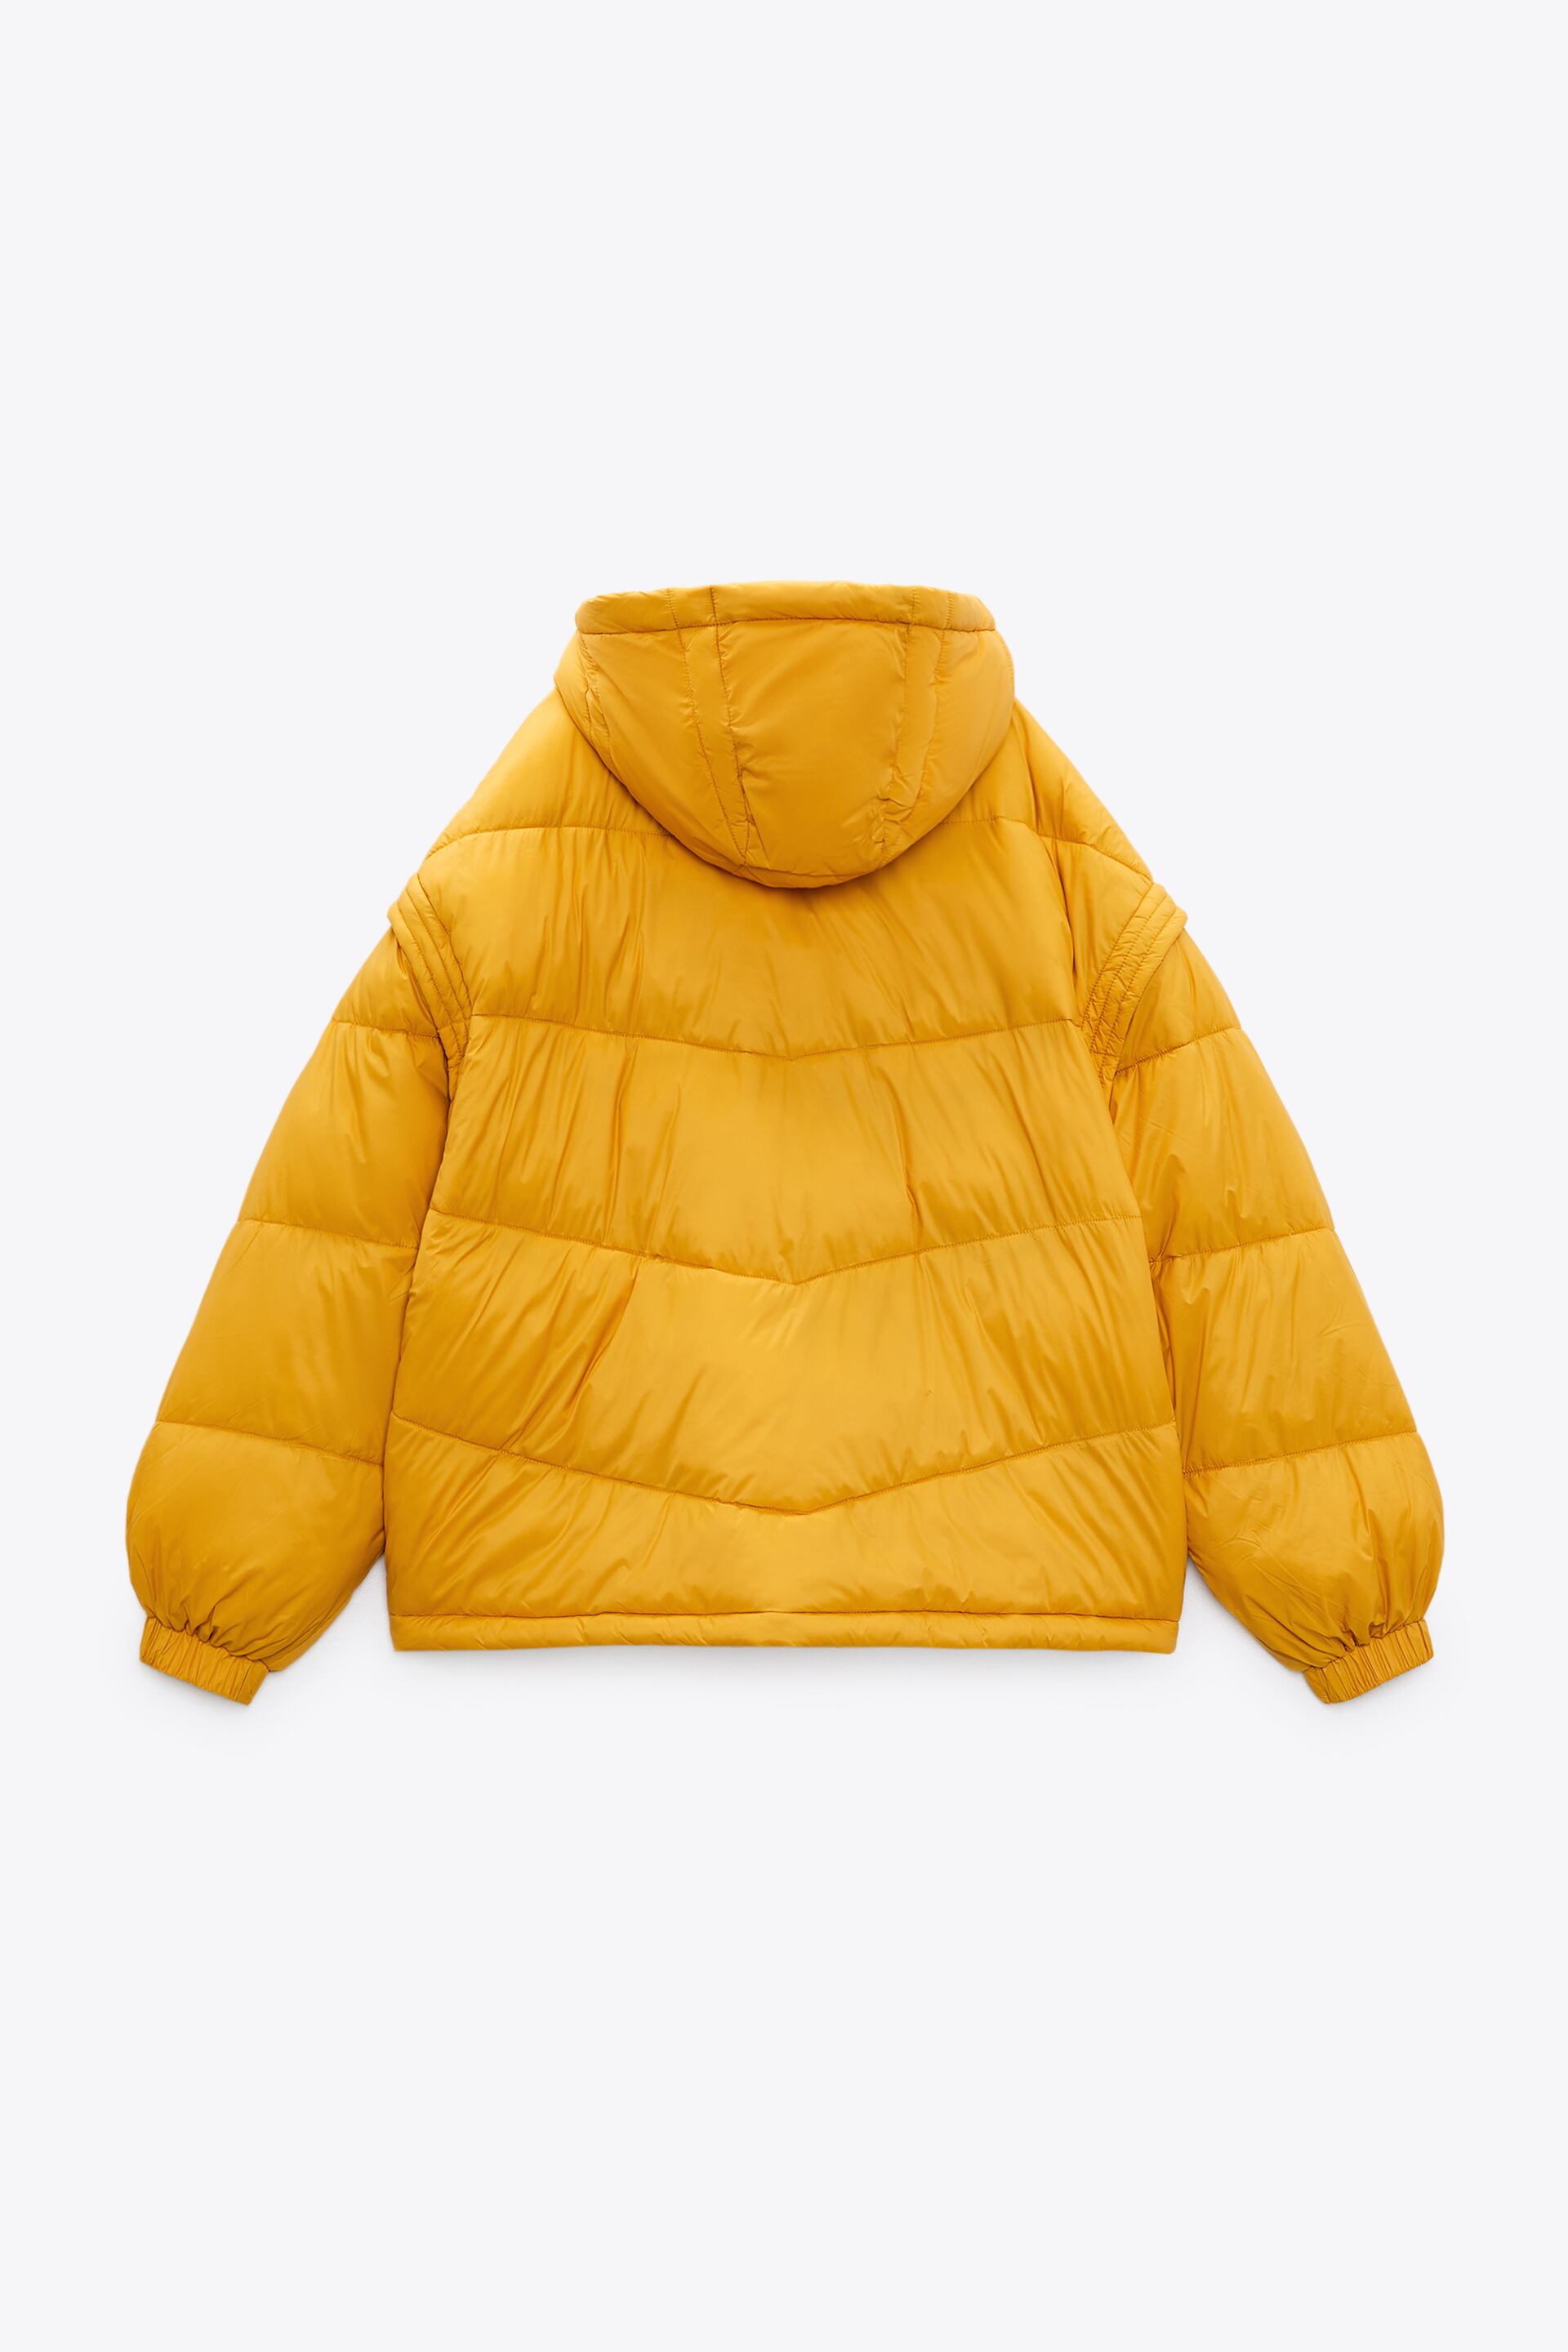 Zara - WATER-REPELLENT PUFFER JACKET WITH DETACHABLE SLEEVES